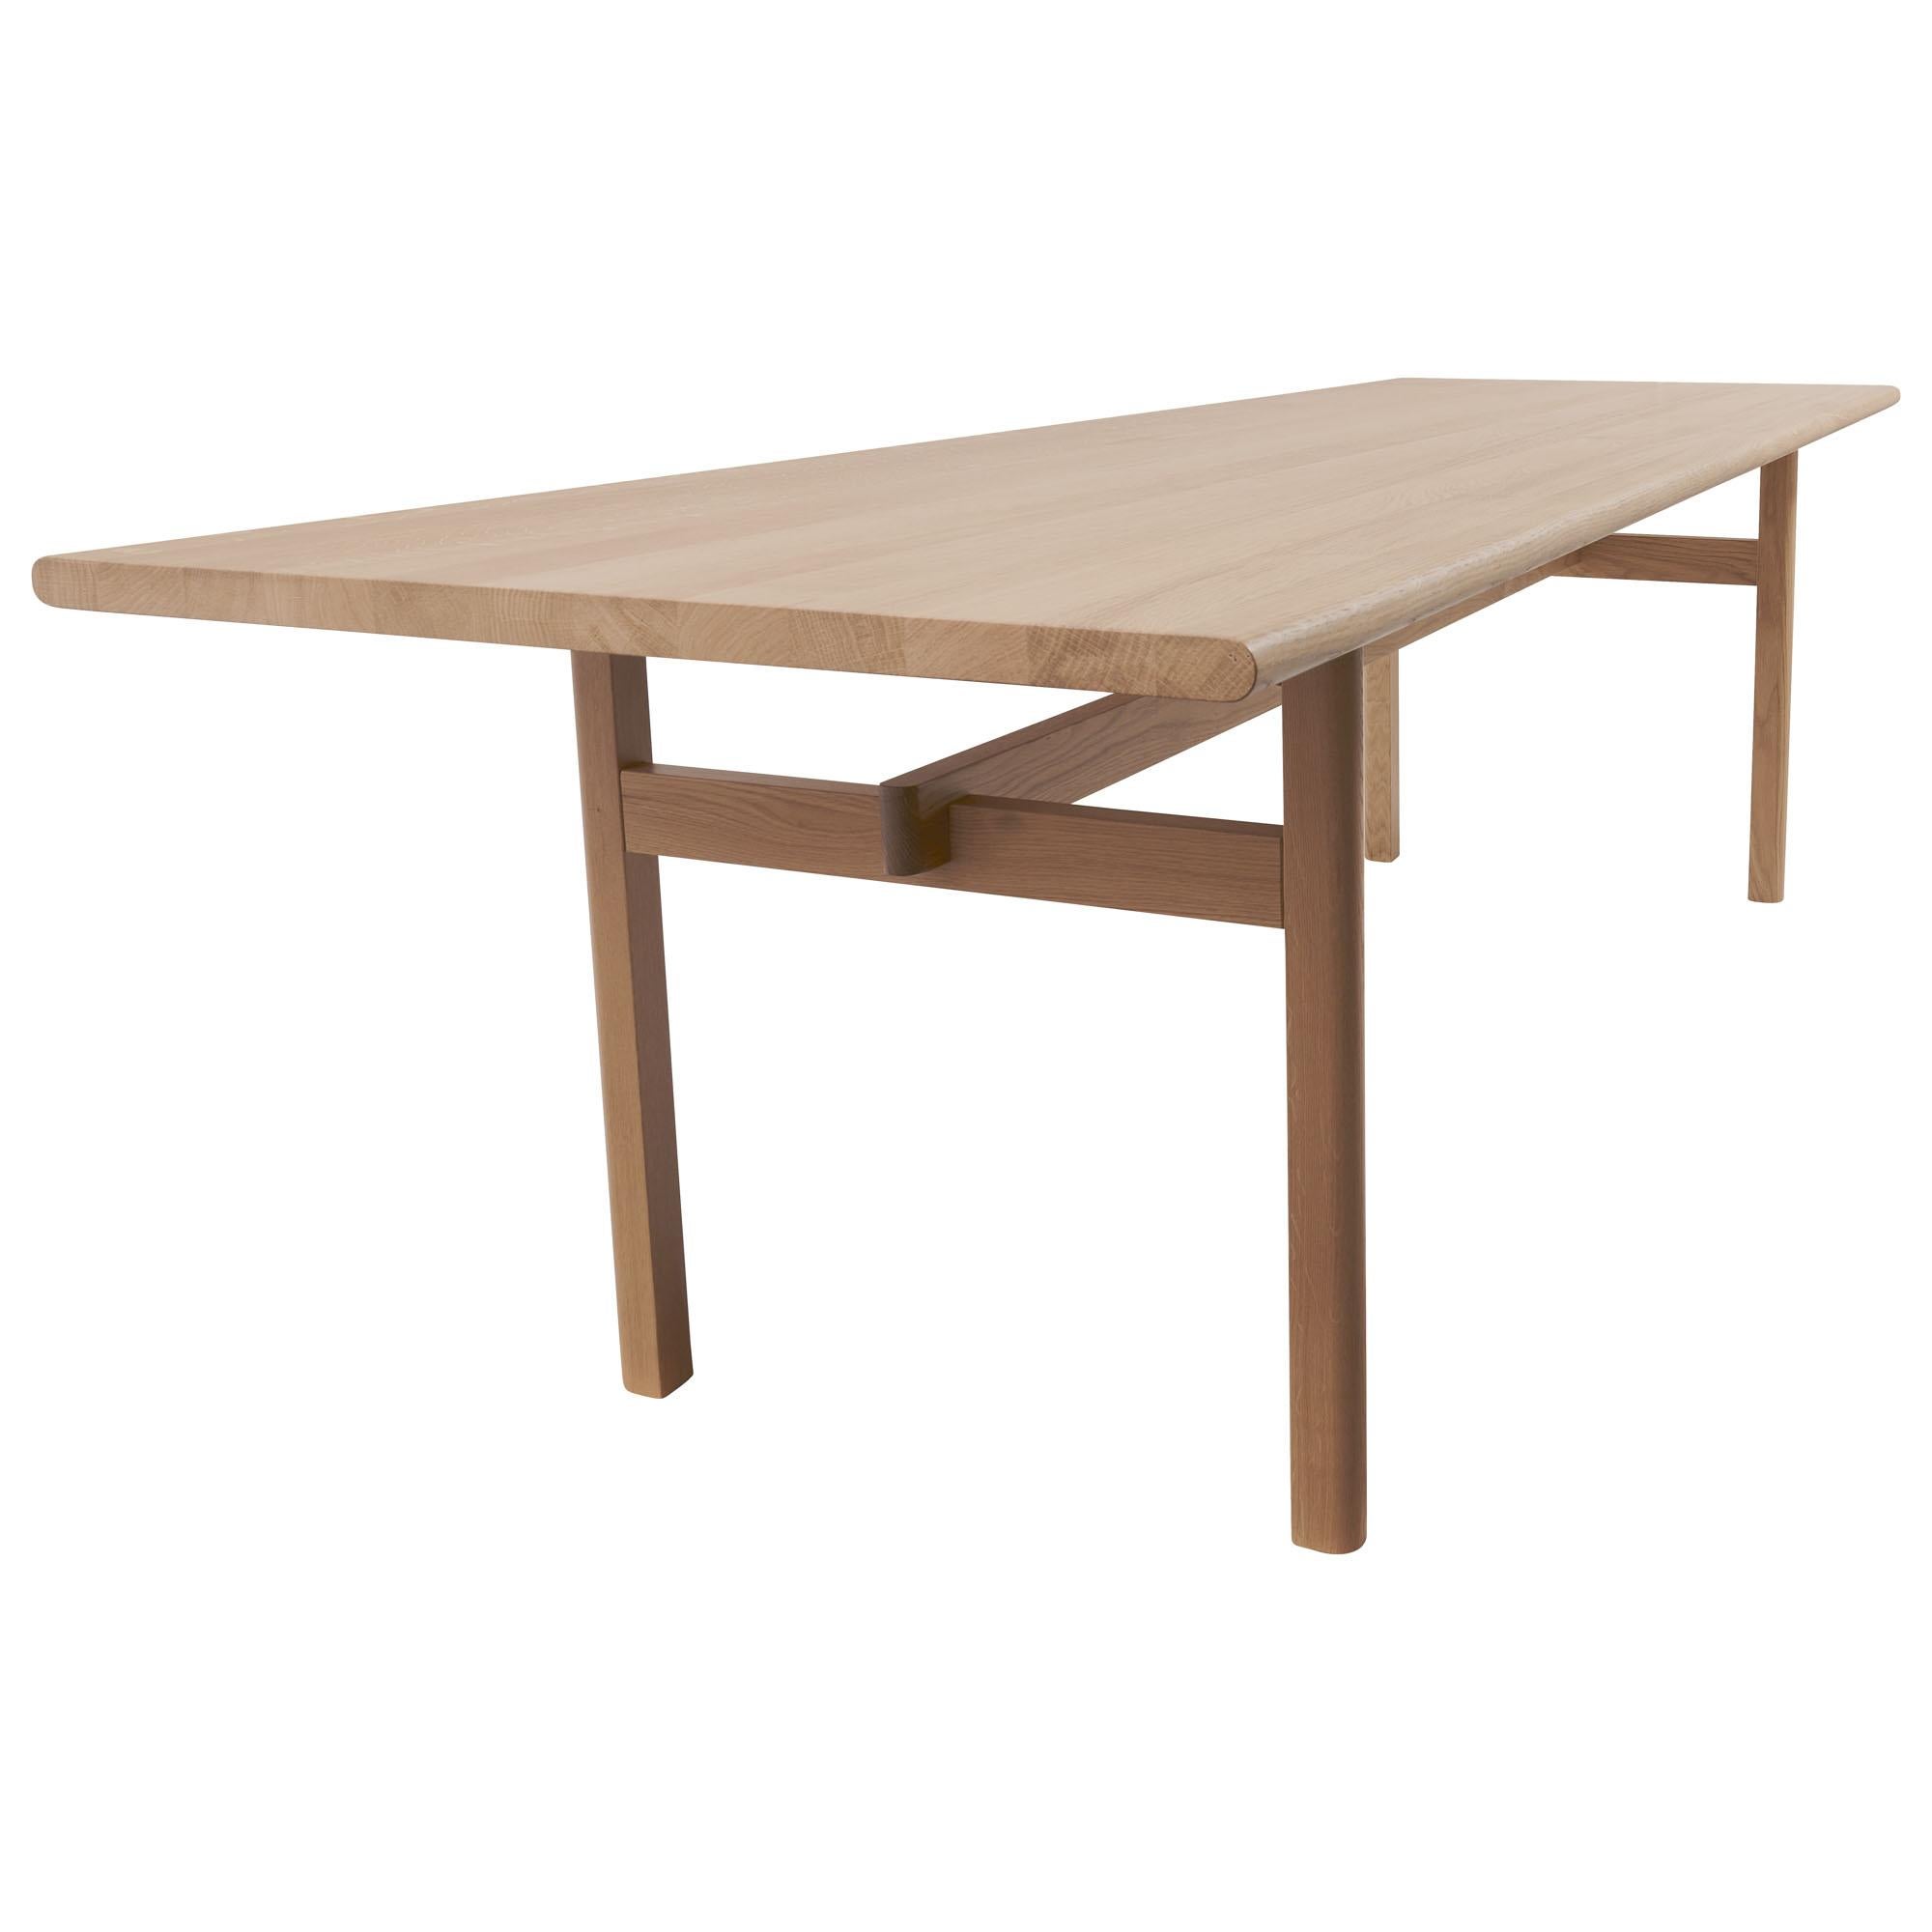 Finished to highlight the naturally beautiful qualities of solid oak, the Mokki Dining Table was designed by Salla Luhtasela and Wesley Walters of Finland’s Studio Kaksikko. Its modernist details nod to midcentury design, while clean, uncomplicated